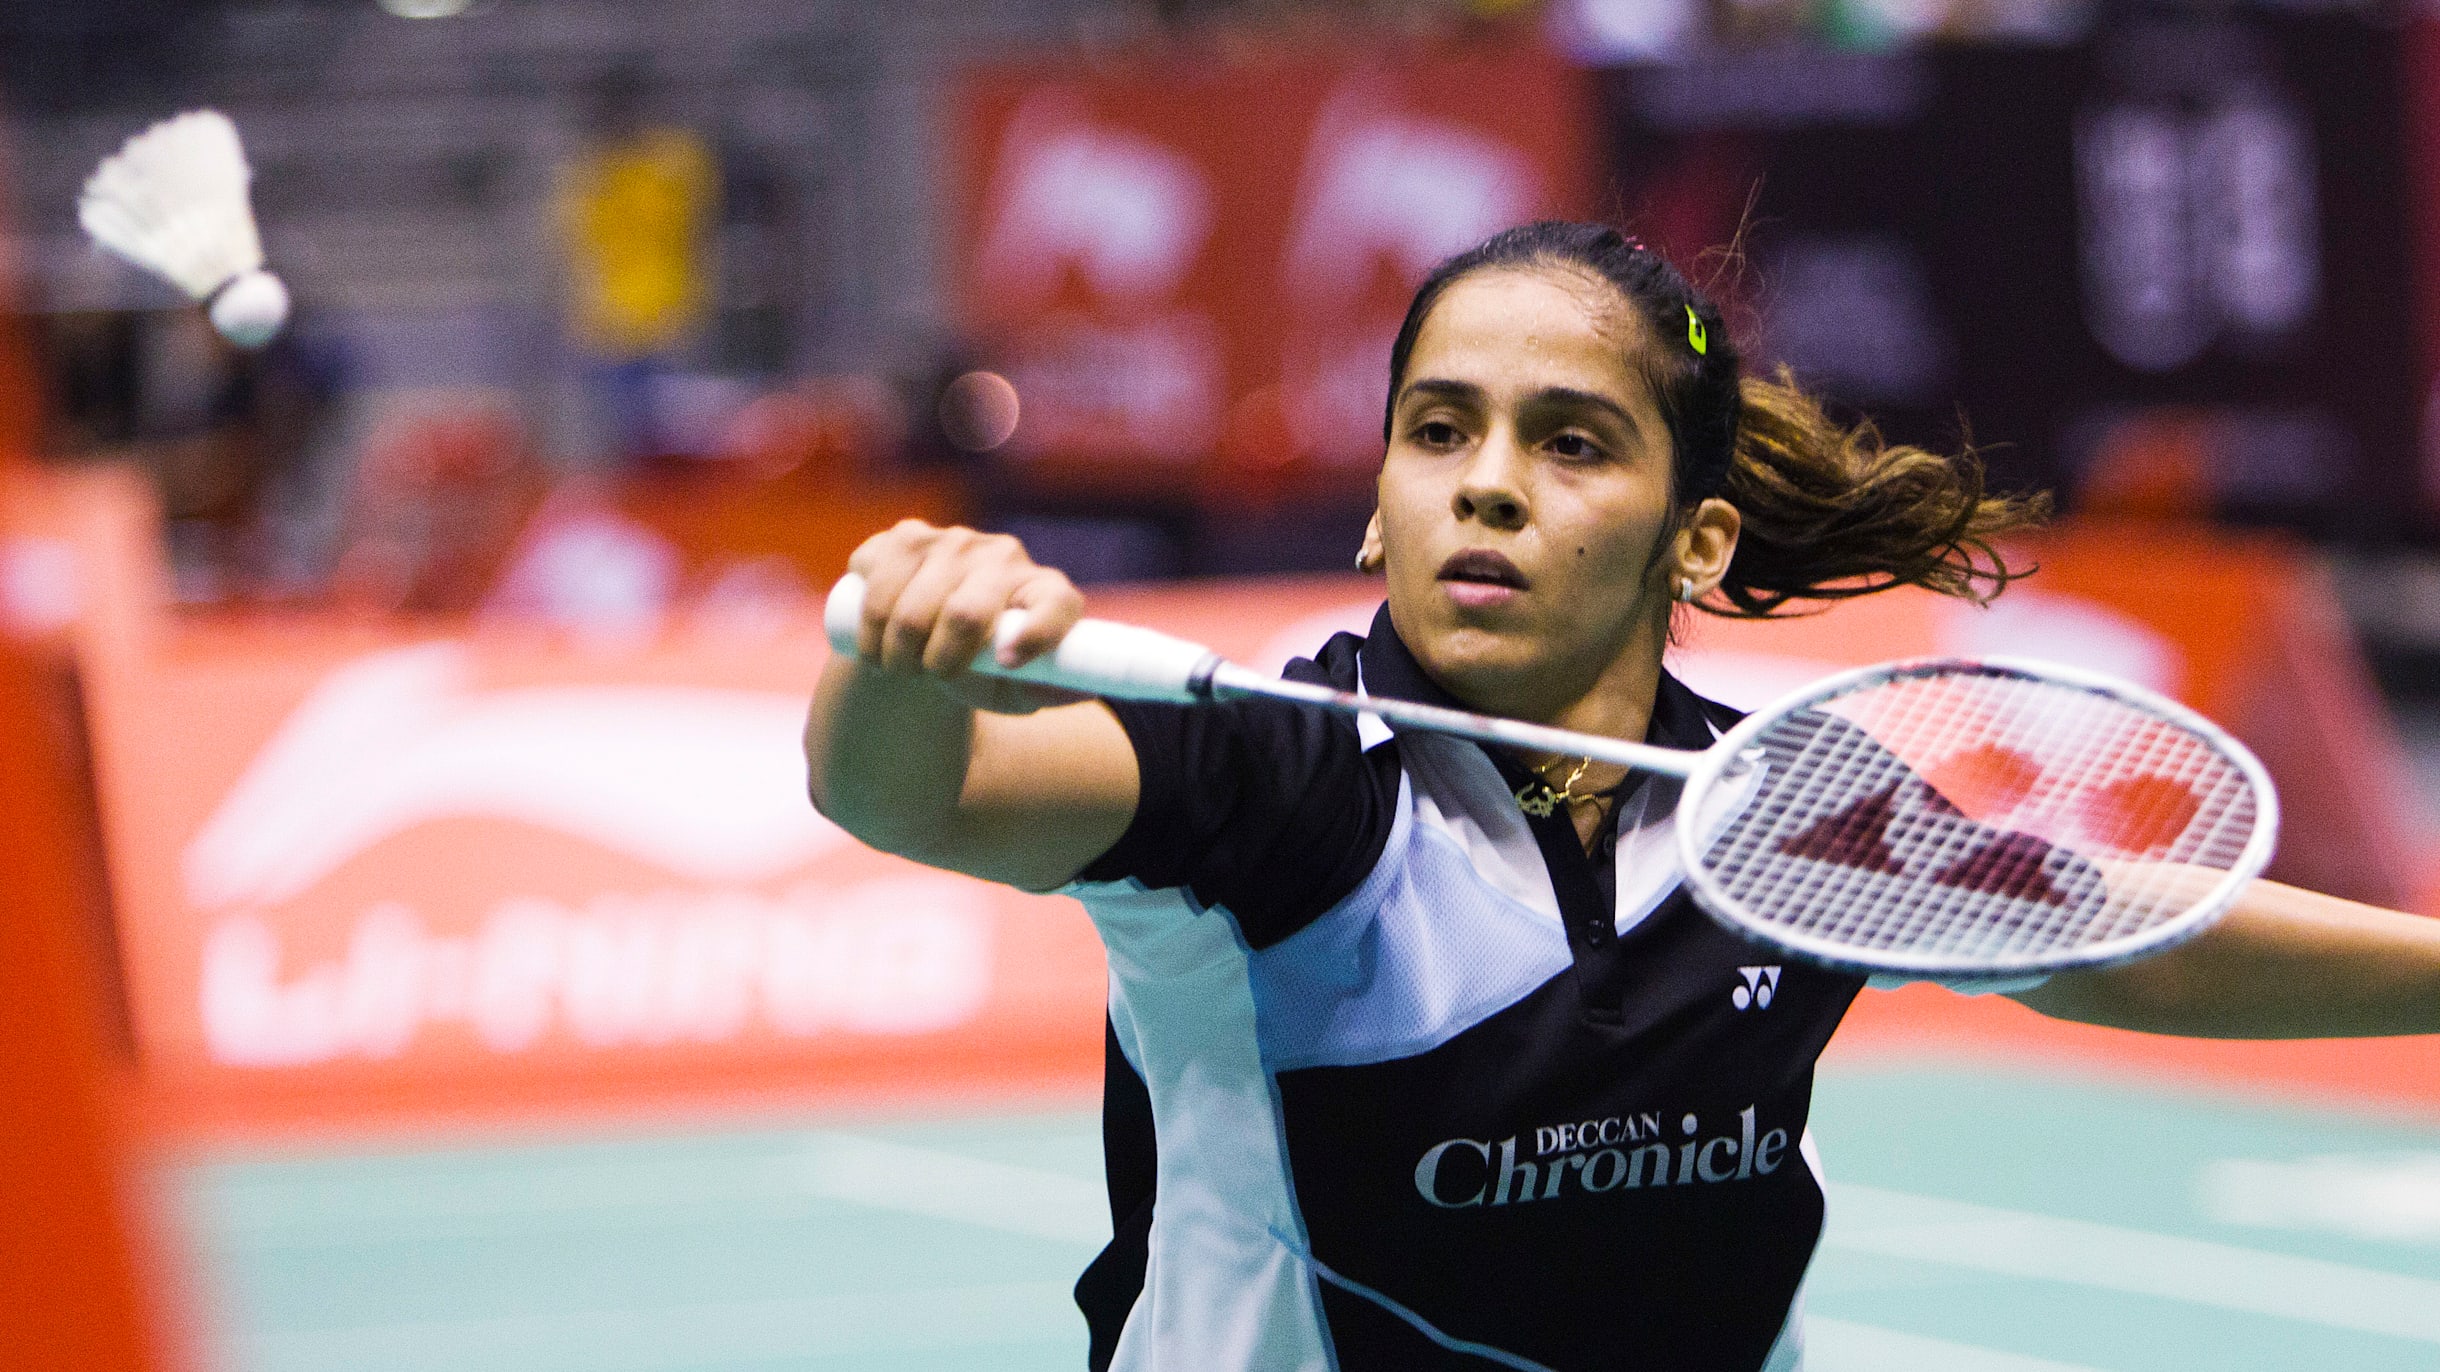 Orleans Masters 2023 badminton Where to watch live streaming in India